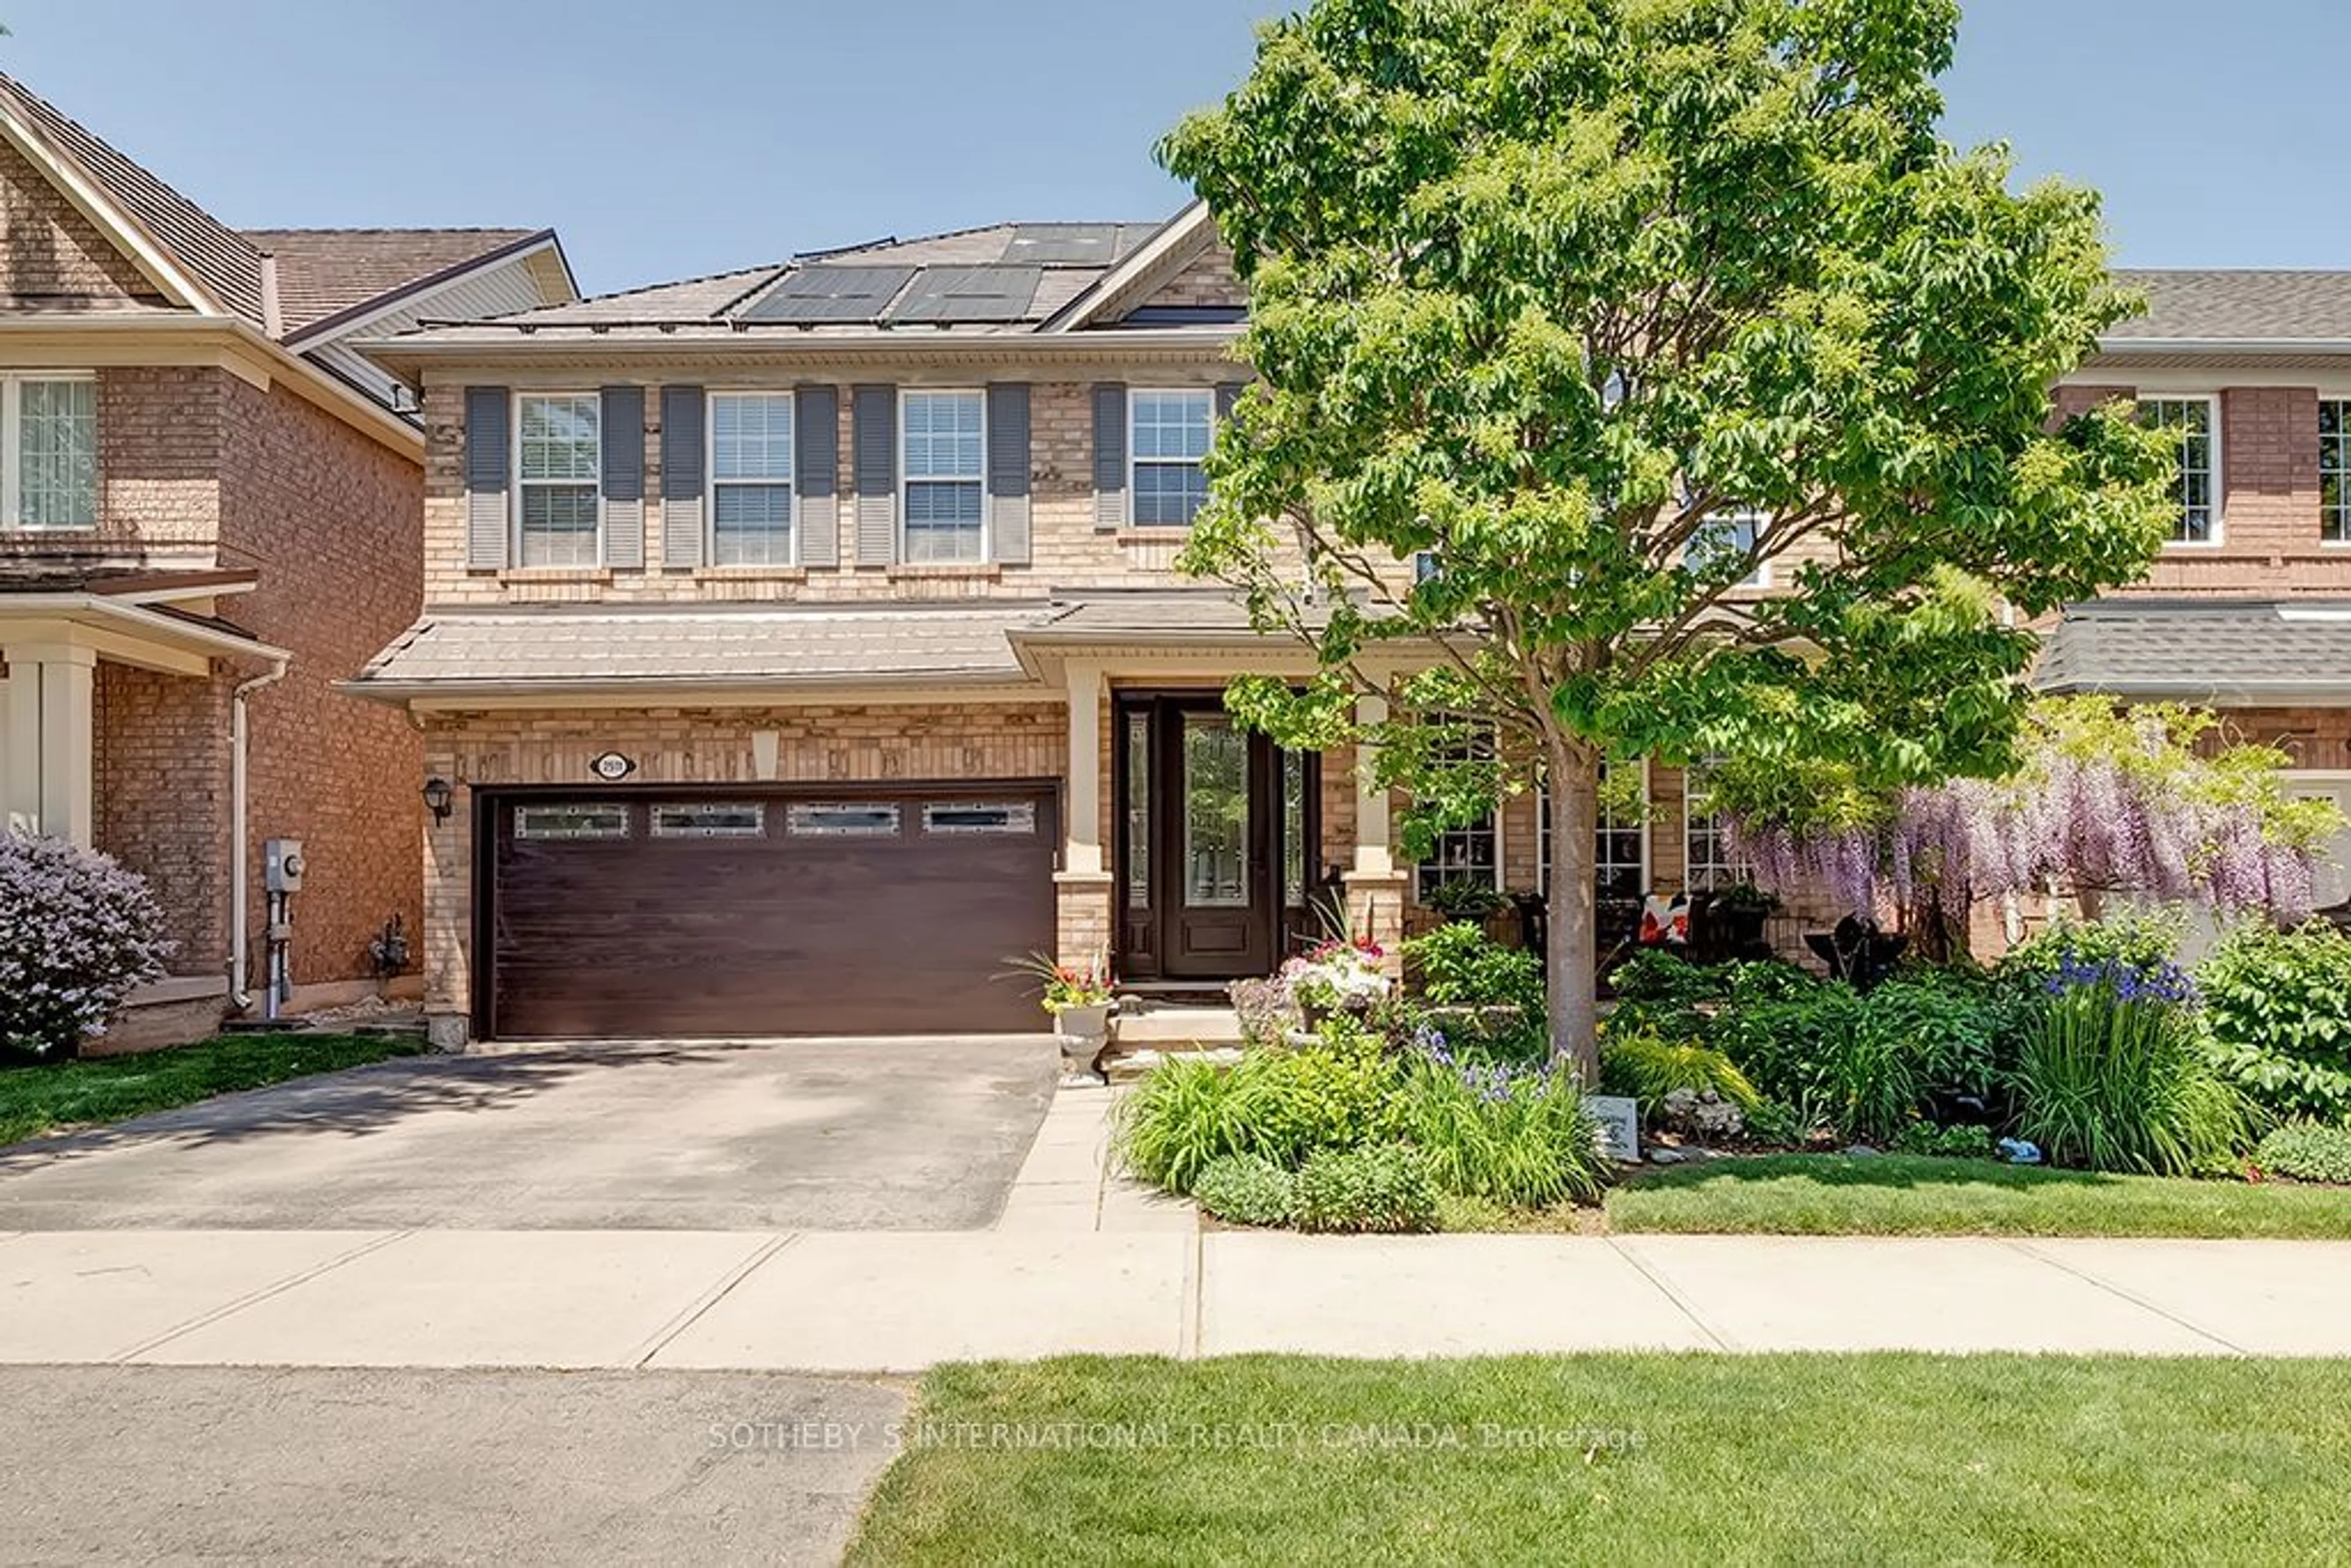 Home with brick exterior material for 2511 Scotch Pine Dr, Oakville Ontario L6M 4C3